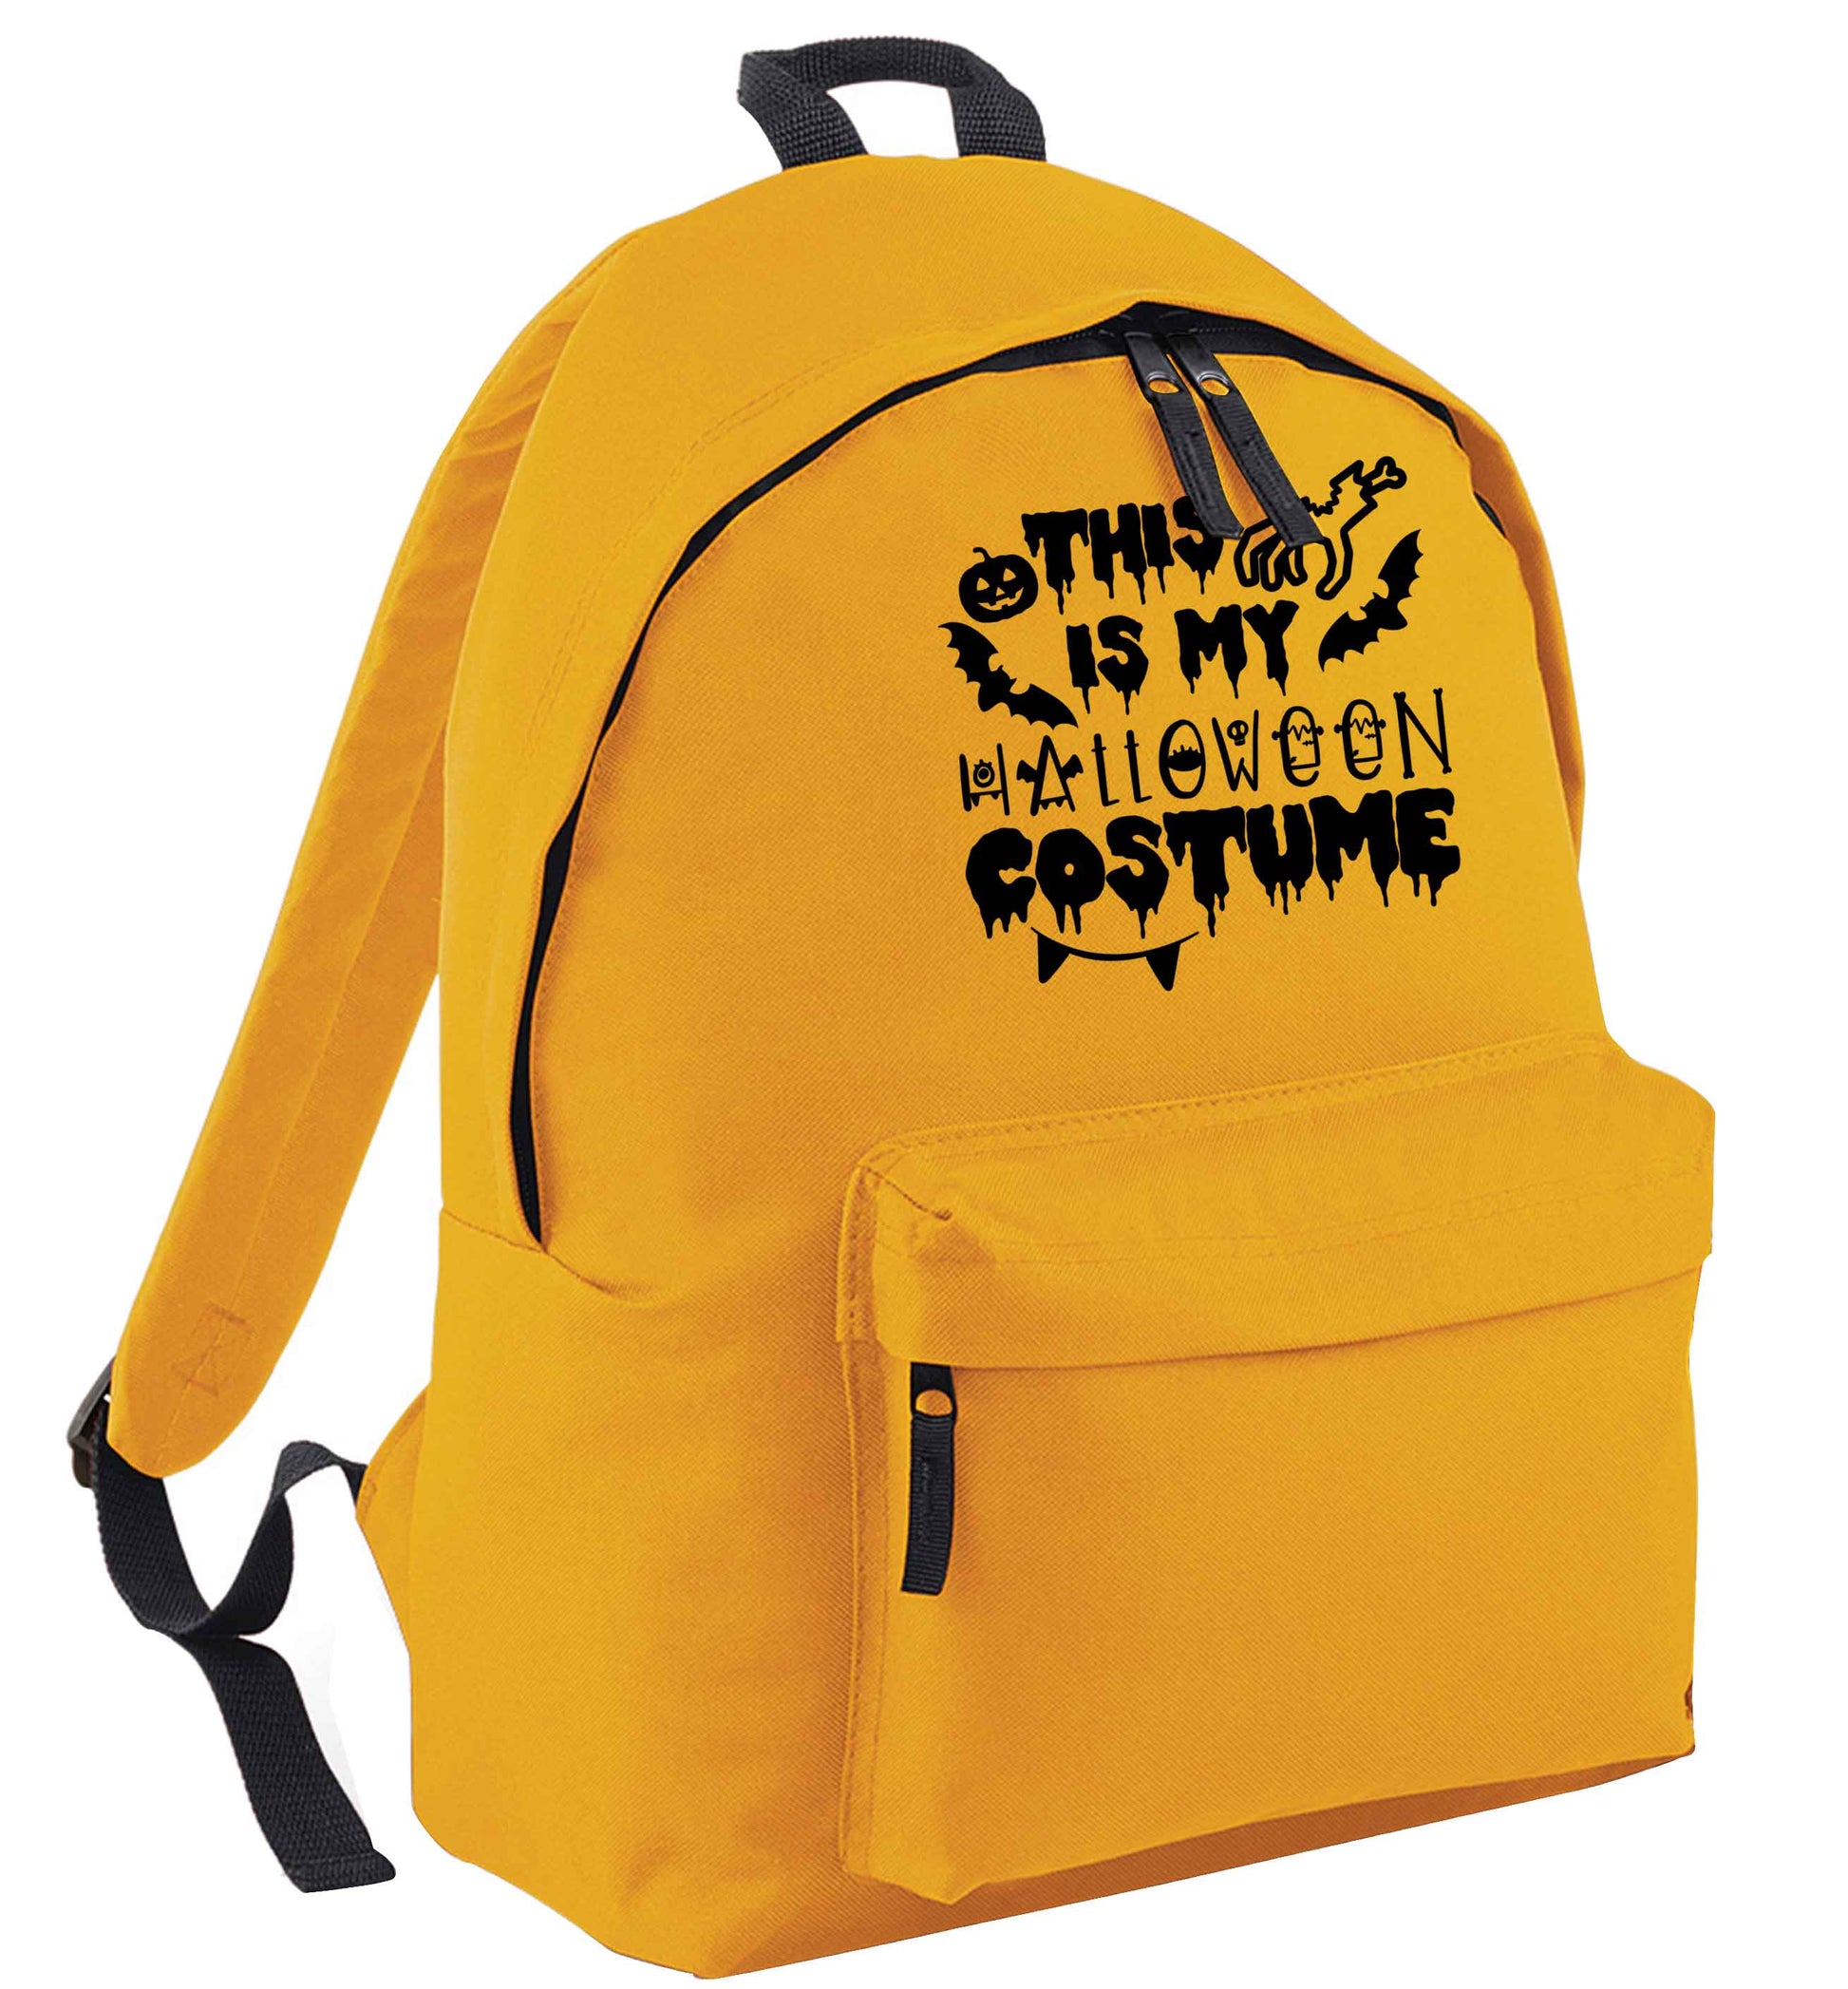 This is my halloween costume mustard adults backpack